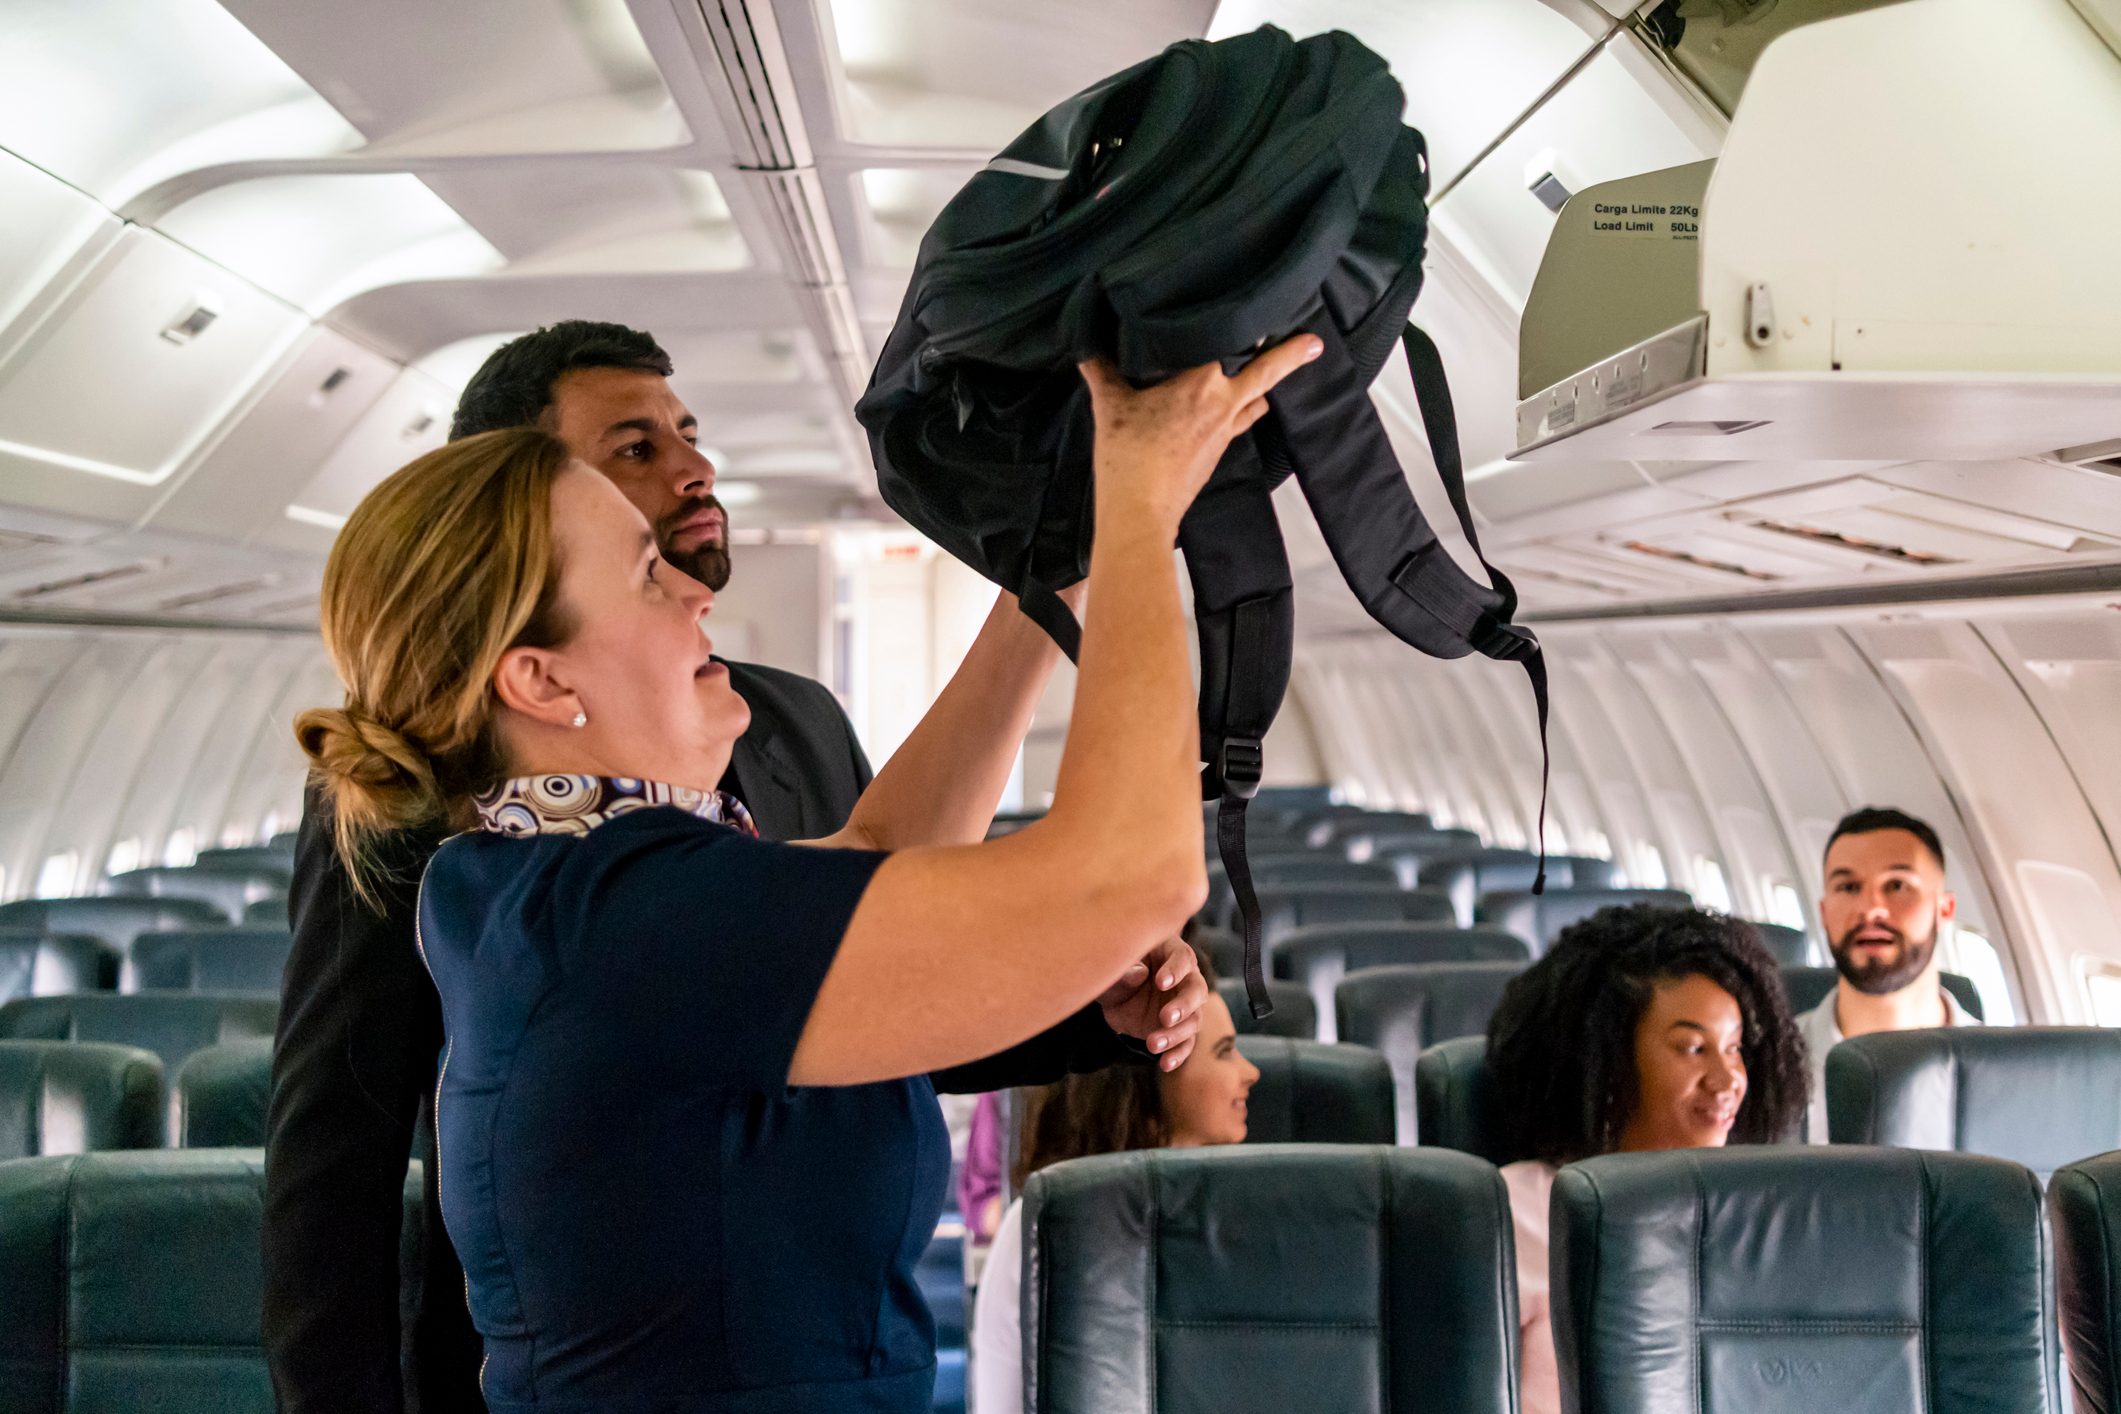 Cabin crew member explains why your phone needs to be in flight